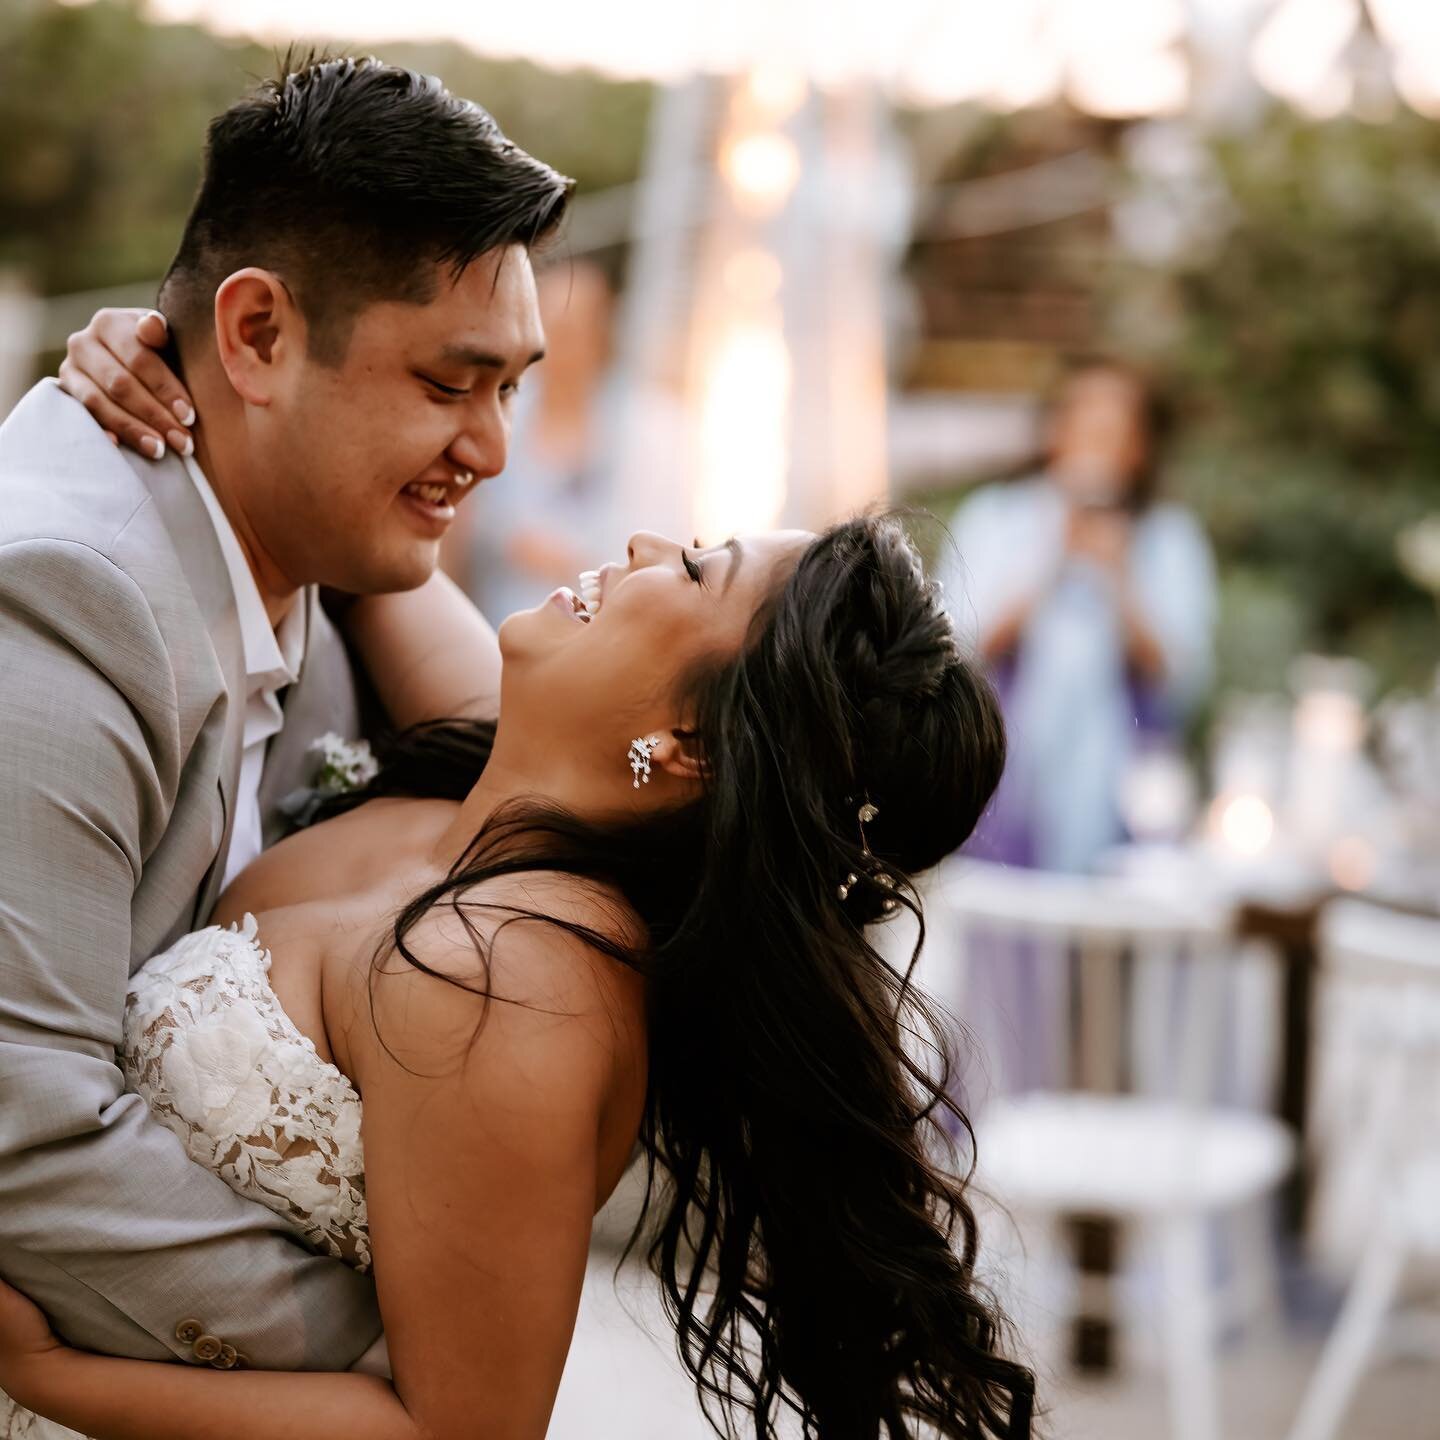 Candice + Kevin 

Bride: @candzp
Groom: @kwu1110
Photography + Film: @the_wild_eyed
Planner/Designer: @micromiami 
Venue: Chateau de la Mer by @beachhousesinparadise 
Hair + Makeup: @kaylaanne_flores
Live Musicians/Entertainment: @cat_carlos_live
Flo